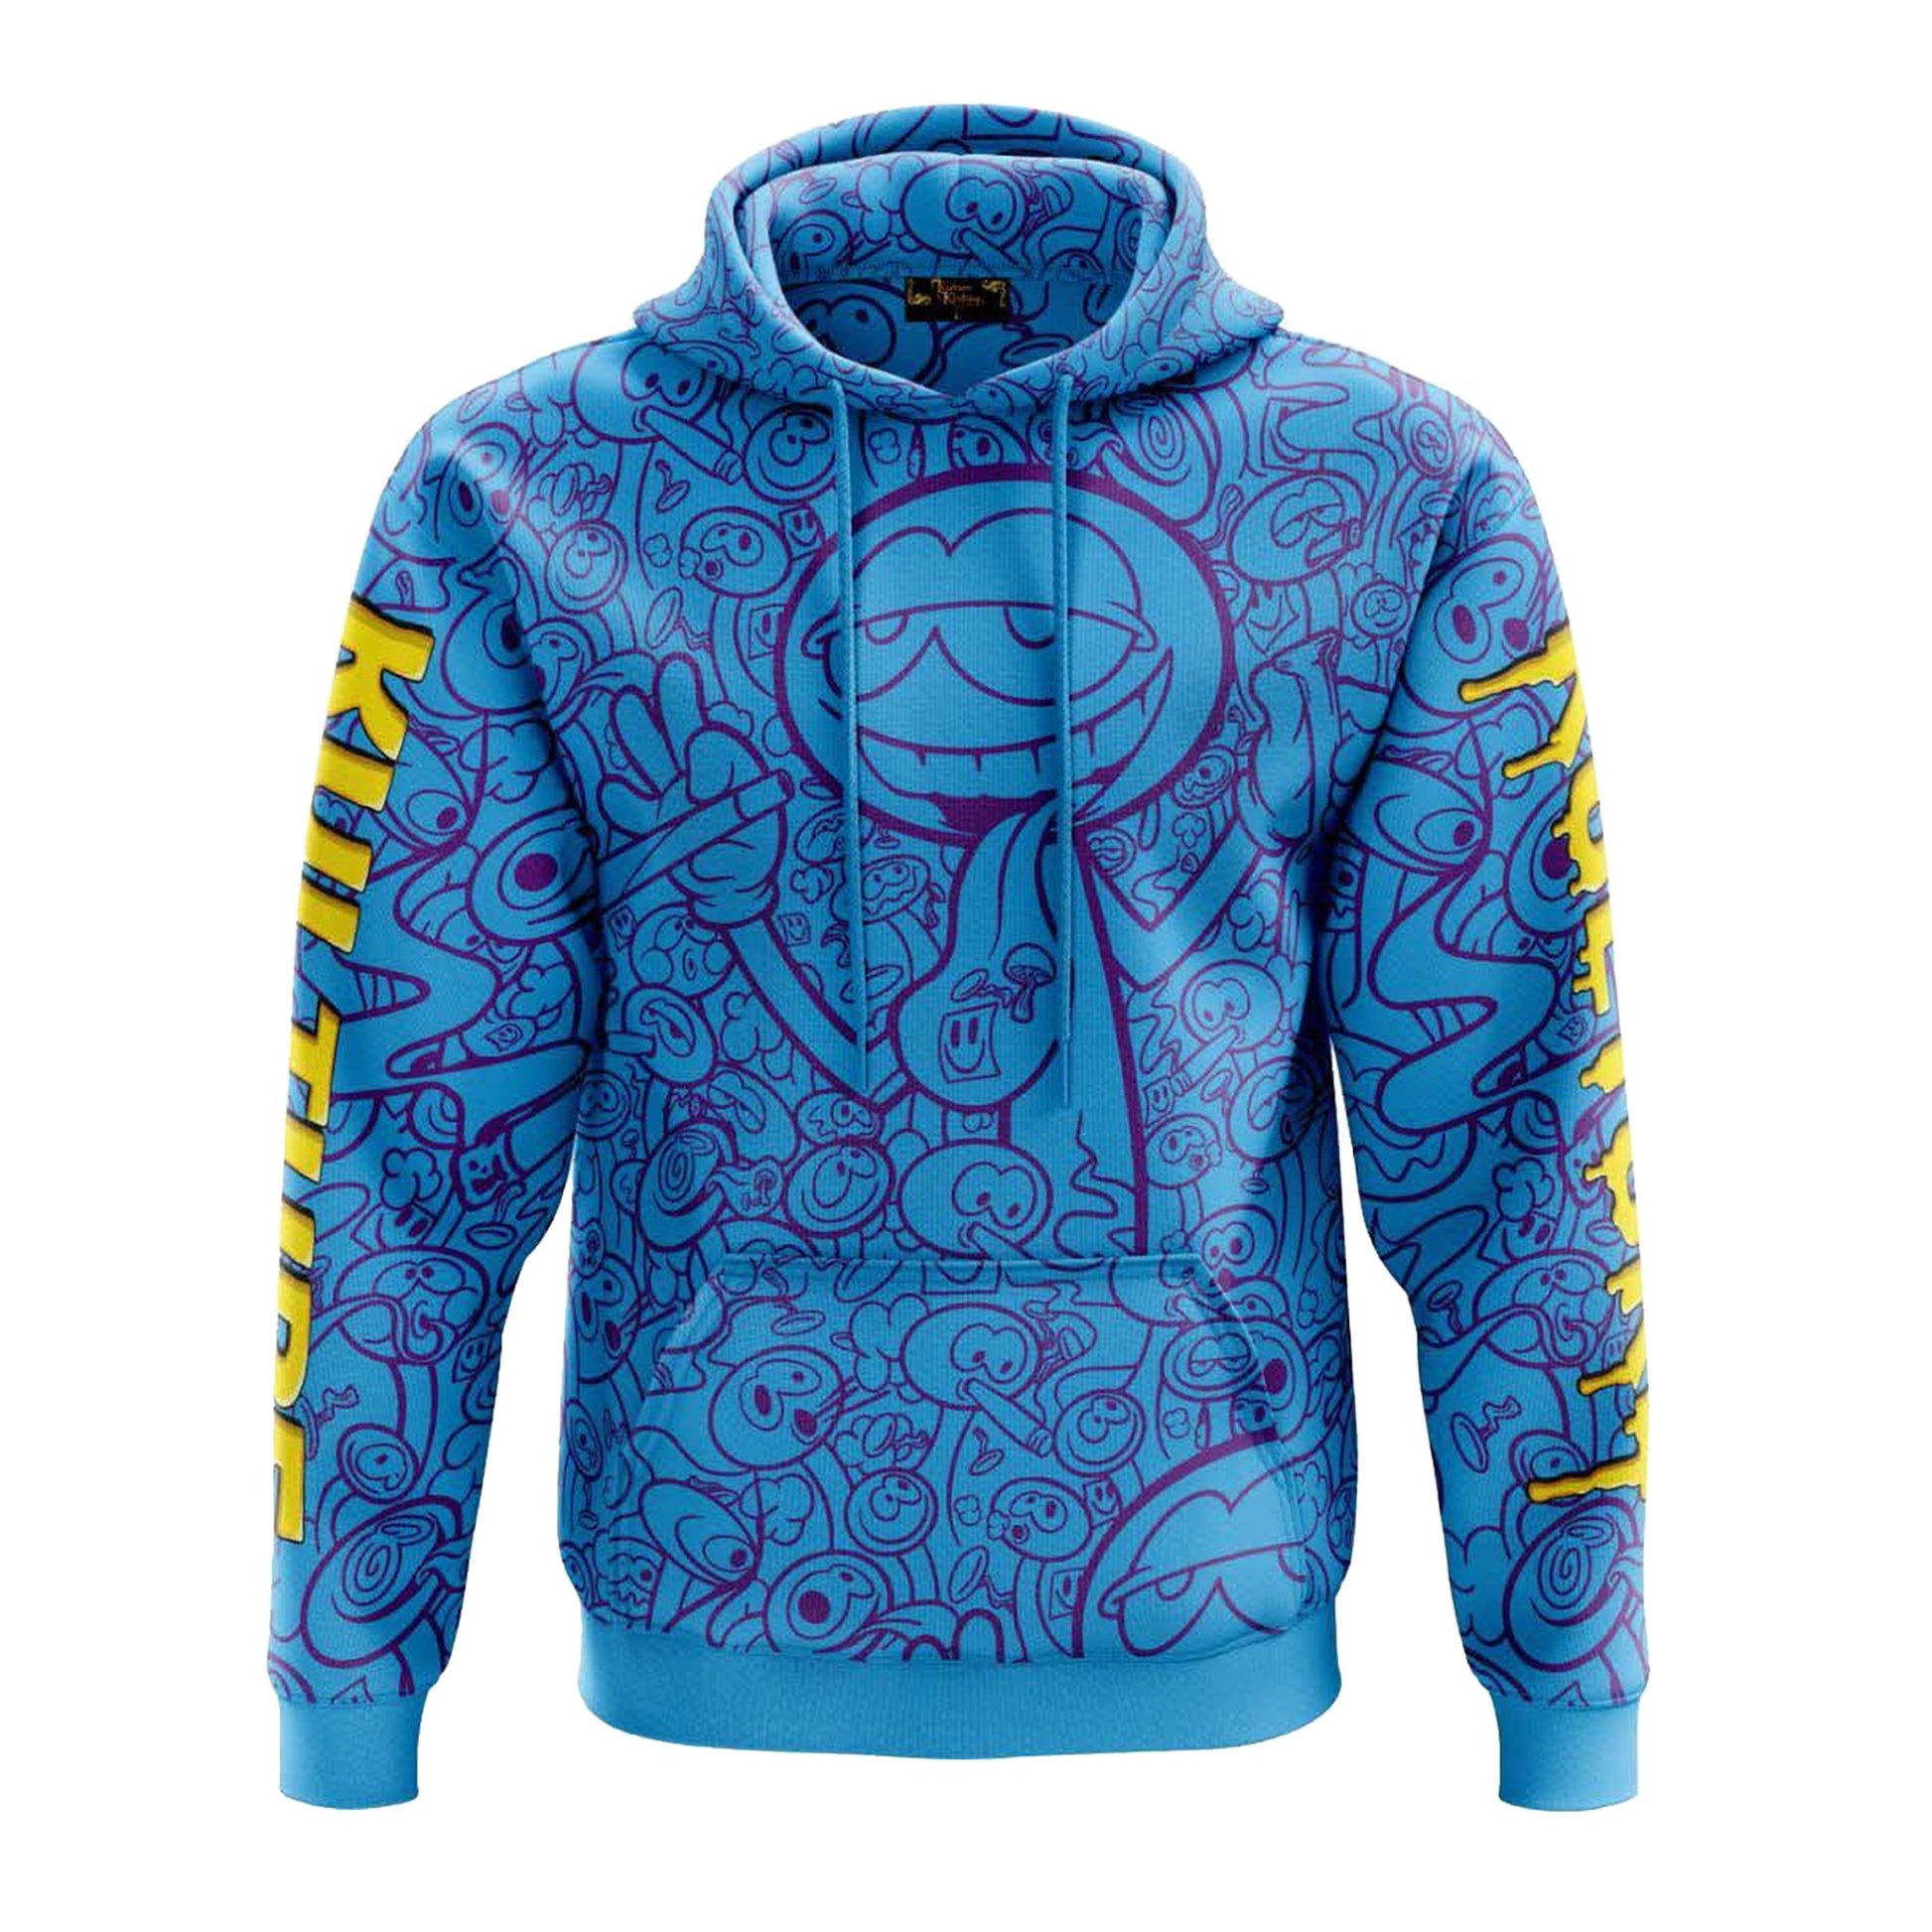 Shatter Face Dye Sublimation Hoodie - Kulture Klothing Club -